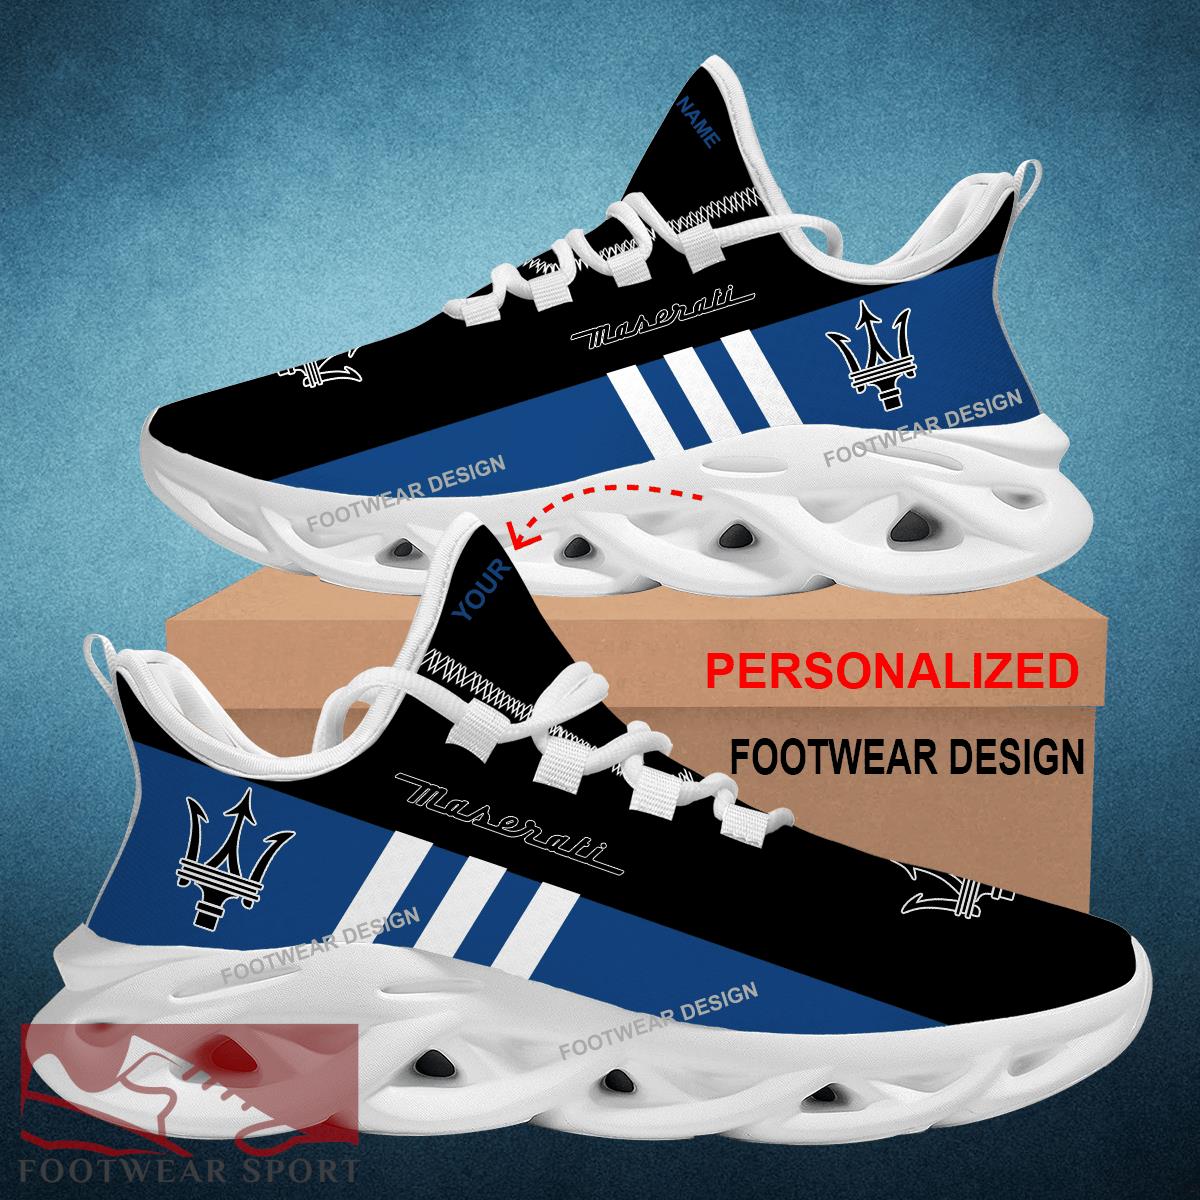 Car Racing Maserati Style Chunky Shoes New Design Gift Fans Max Soul Sneakers Personalized - Car Racing Maserati Logo New Style Chunky Shoes Photo 2